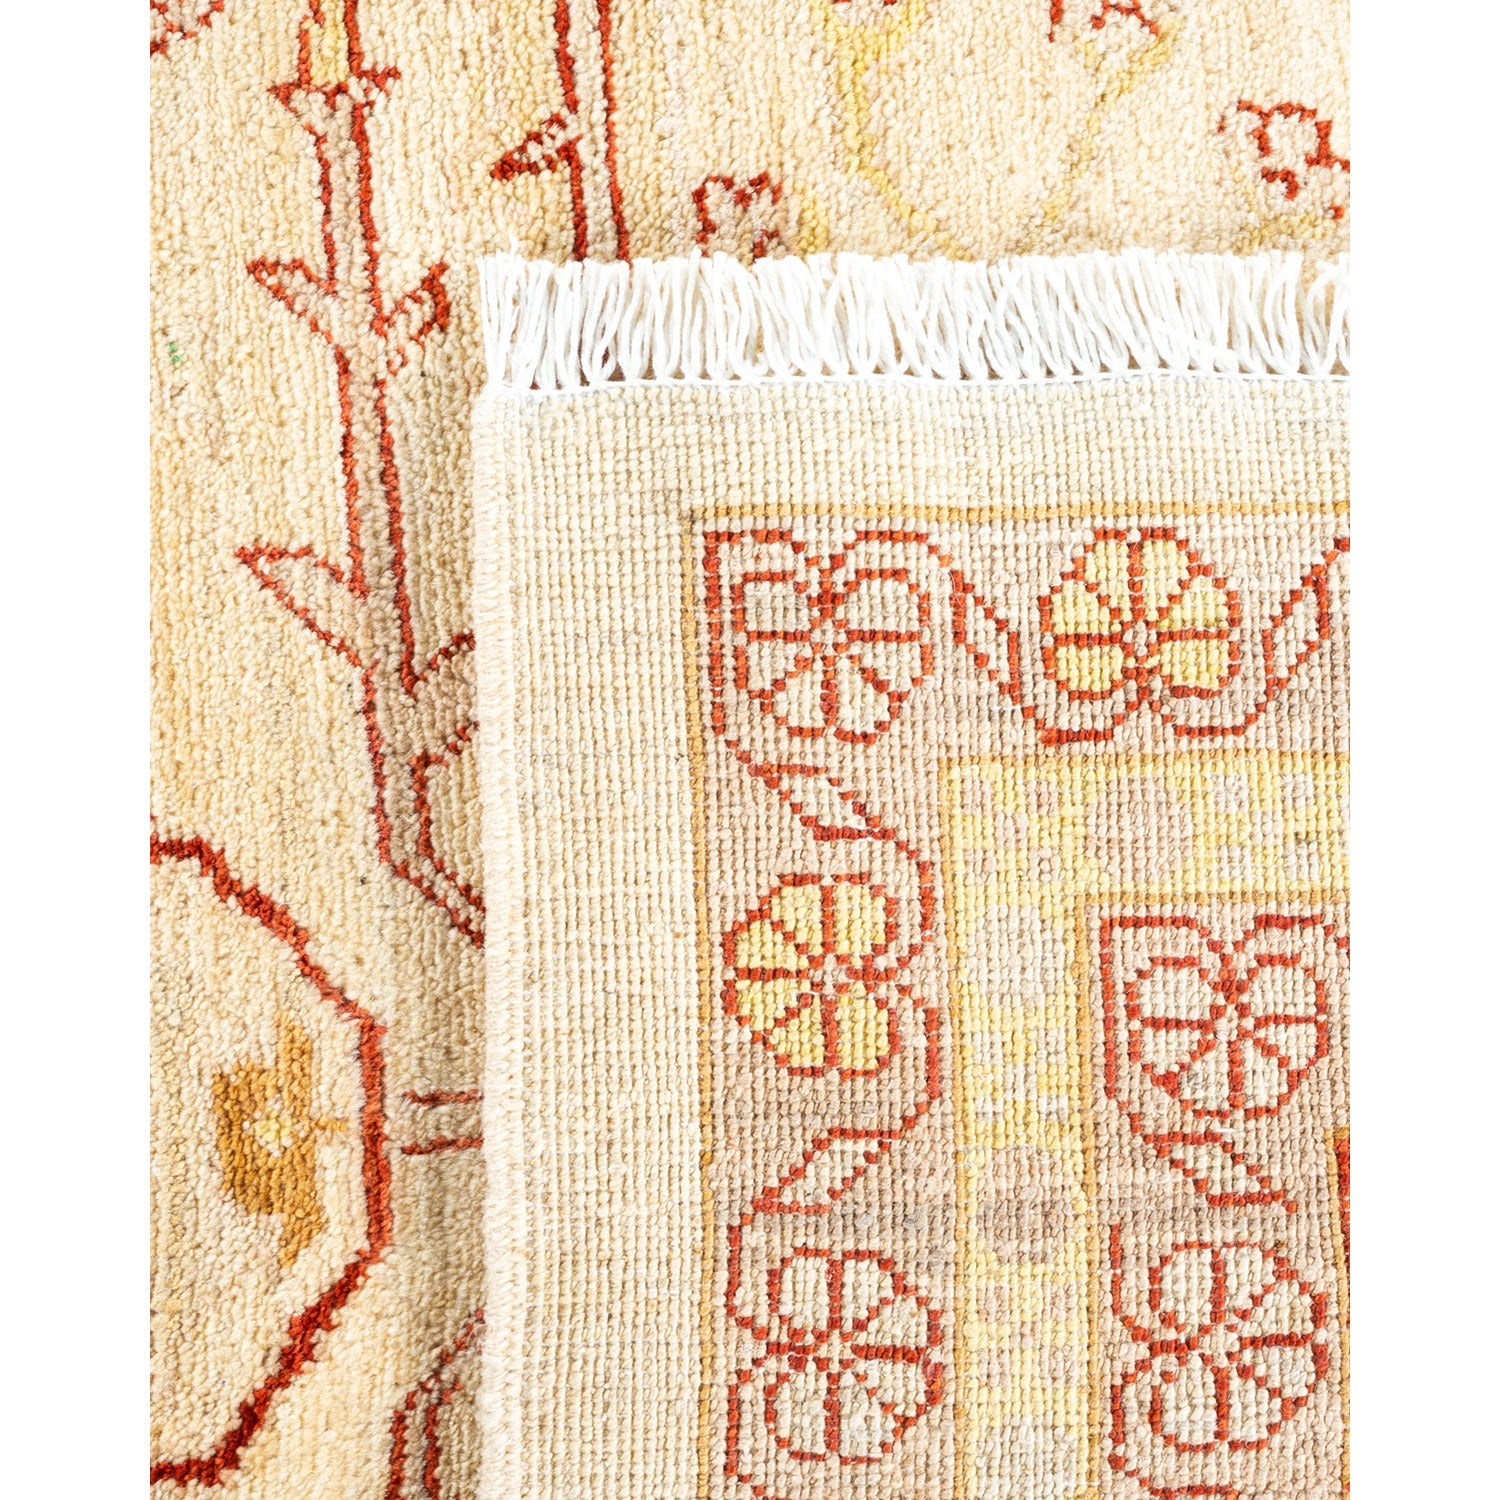 Intricate floral and geometric designs on high-quality handwoven rug.